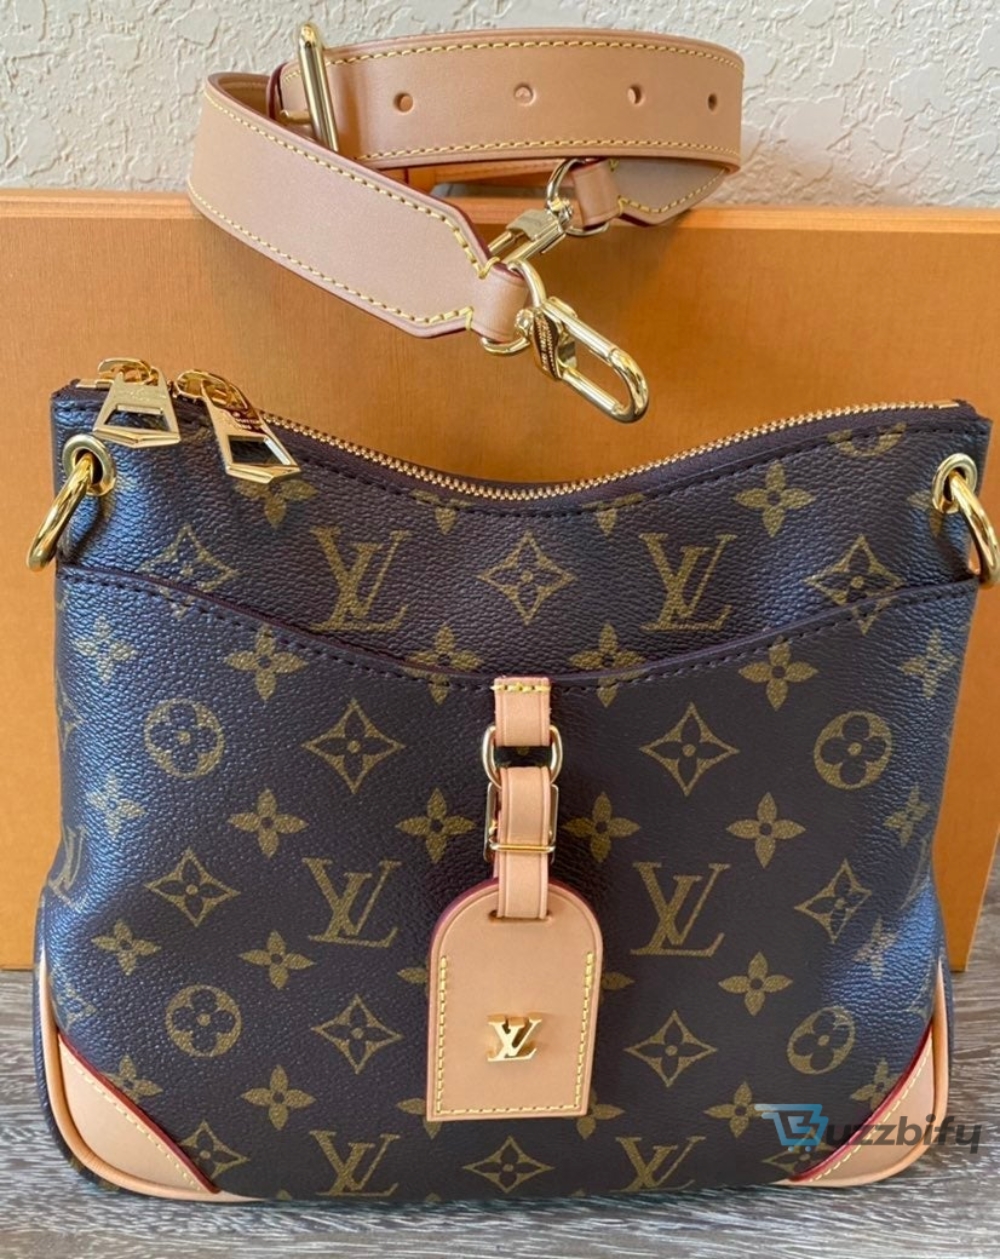 louis vuitton odeon pm monogram canvas natural for fallwinter womens handbags shoulder and crossbody bags 11in28cm lv m45354 2799 buzzbify 1 29